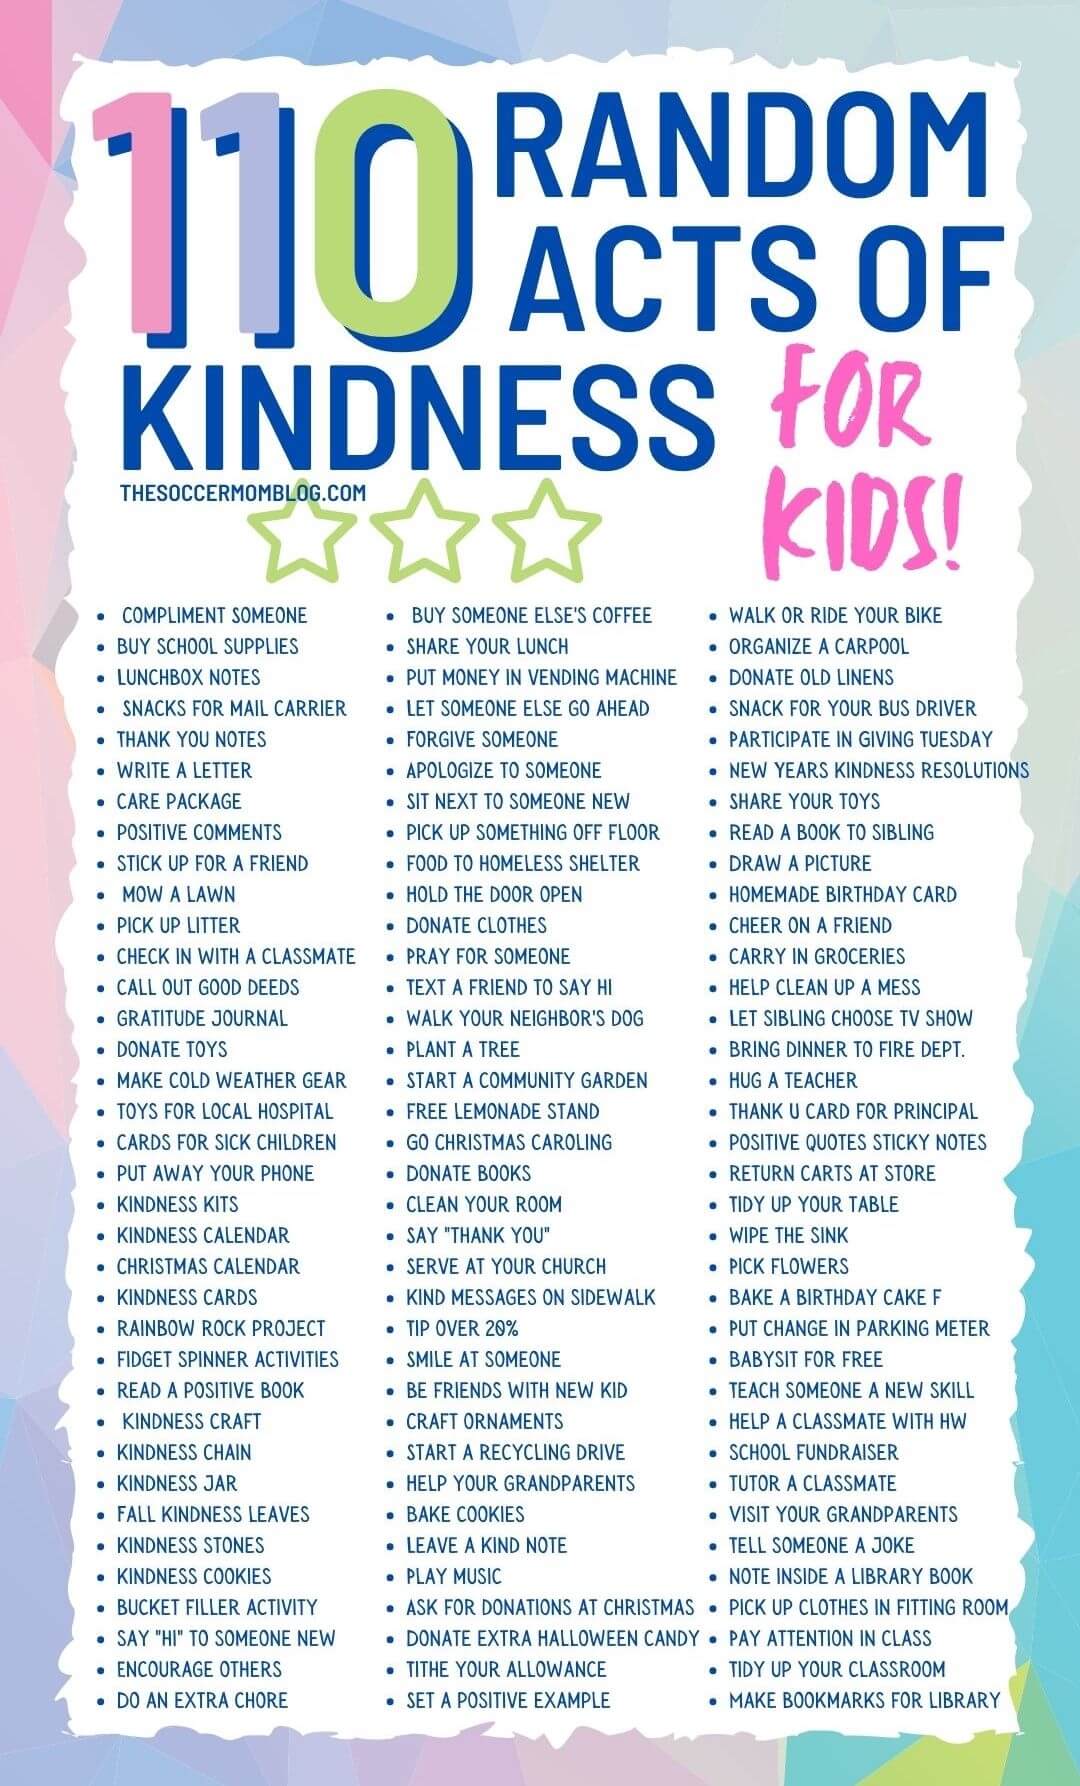 list of 110 random acts of kindness for kids